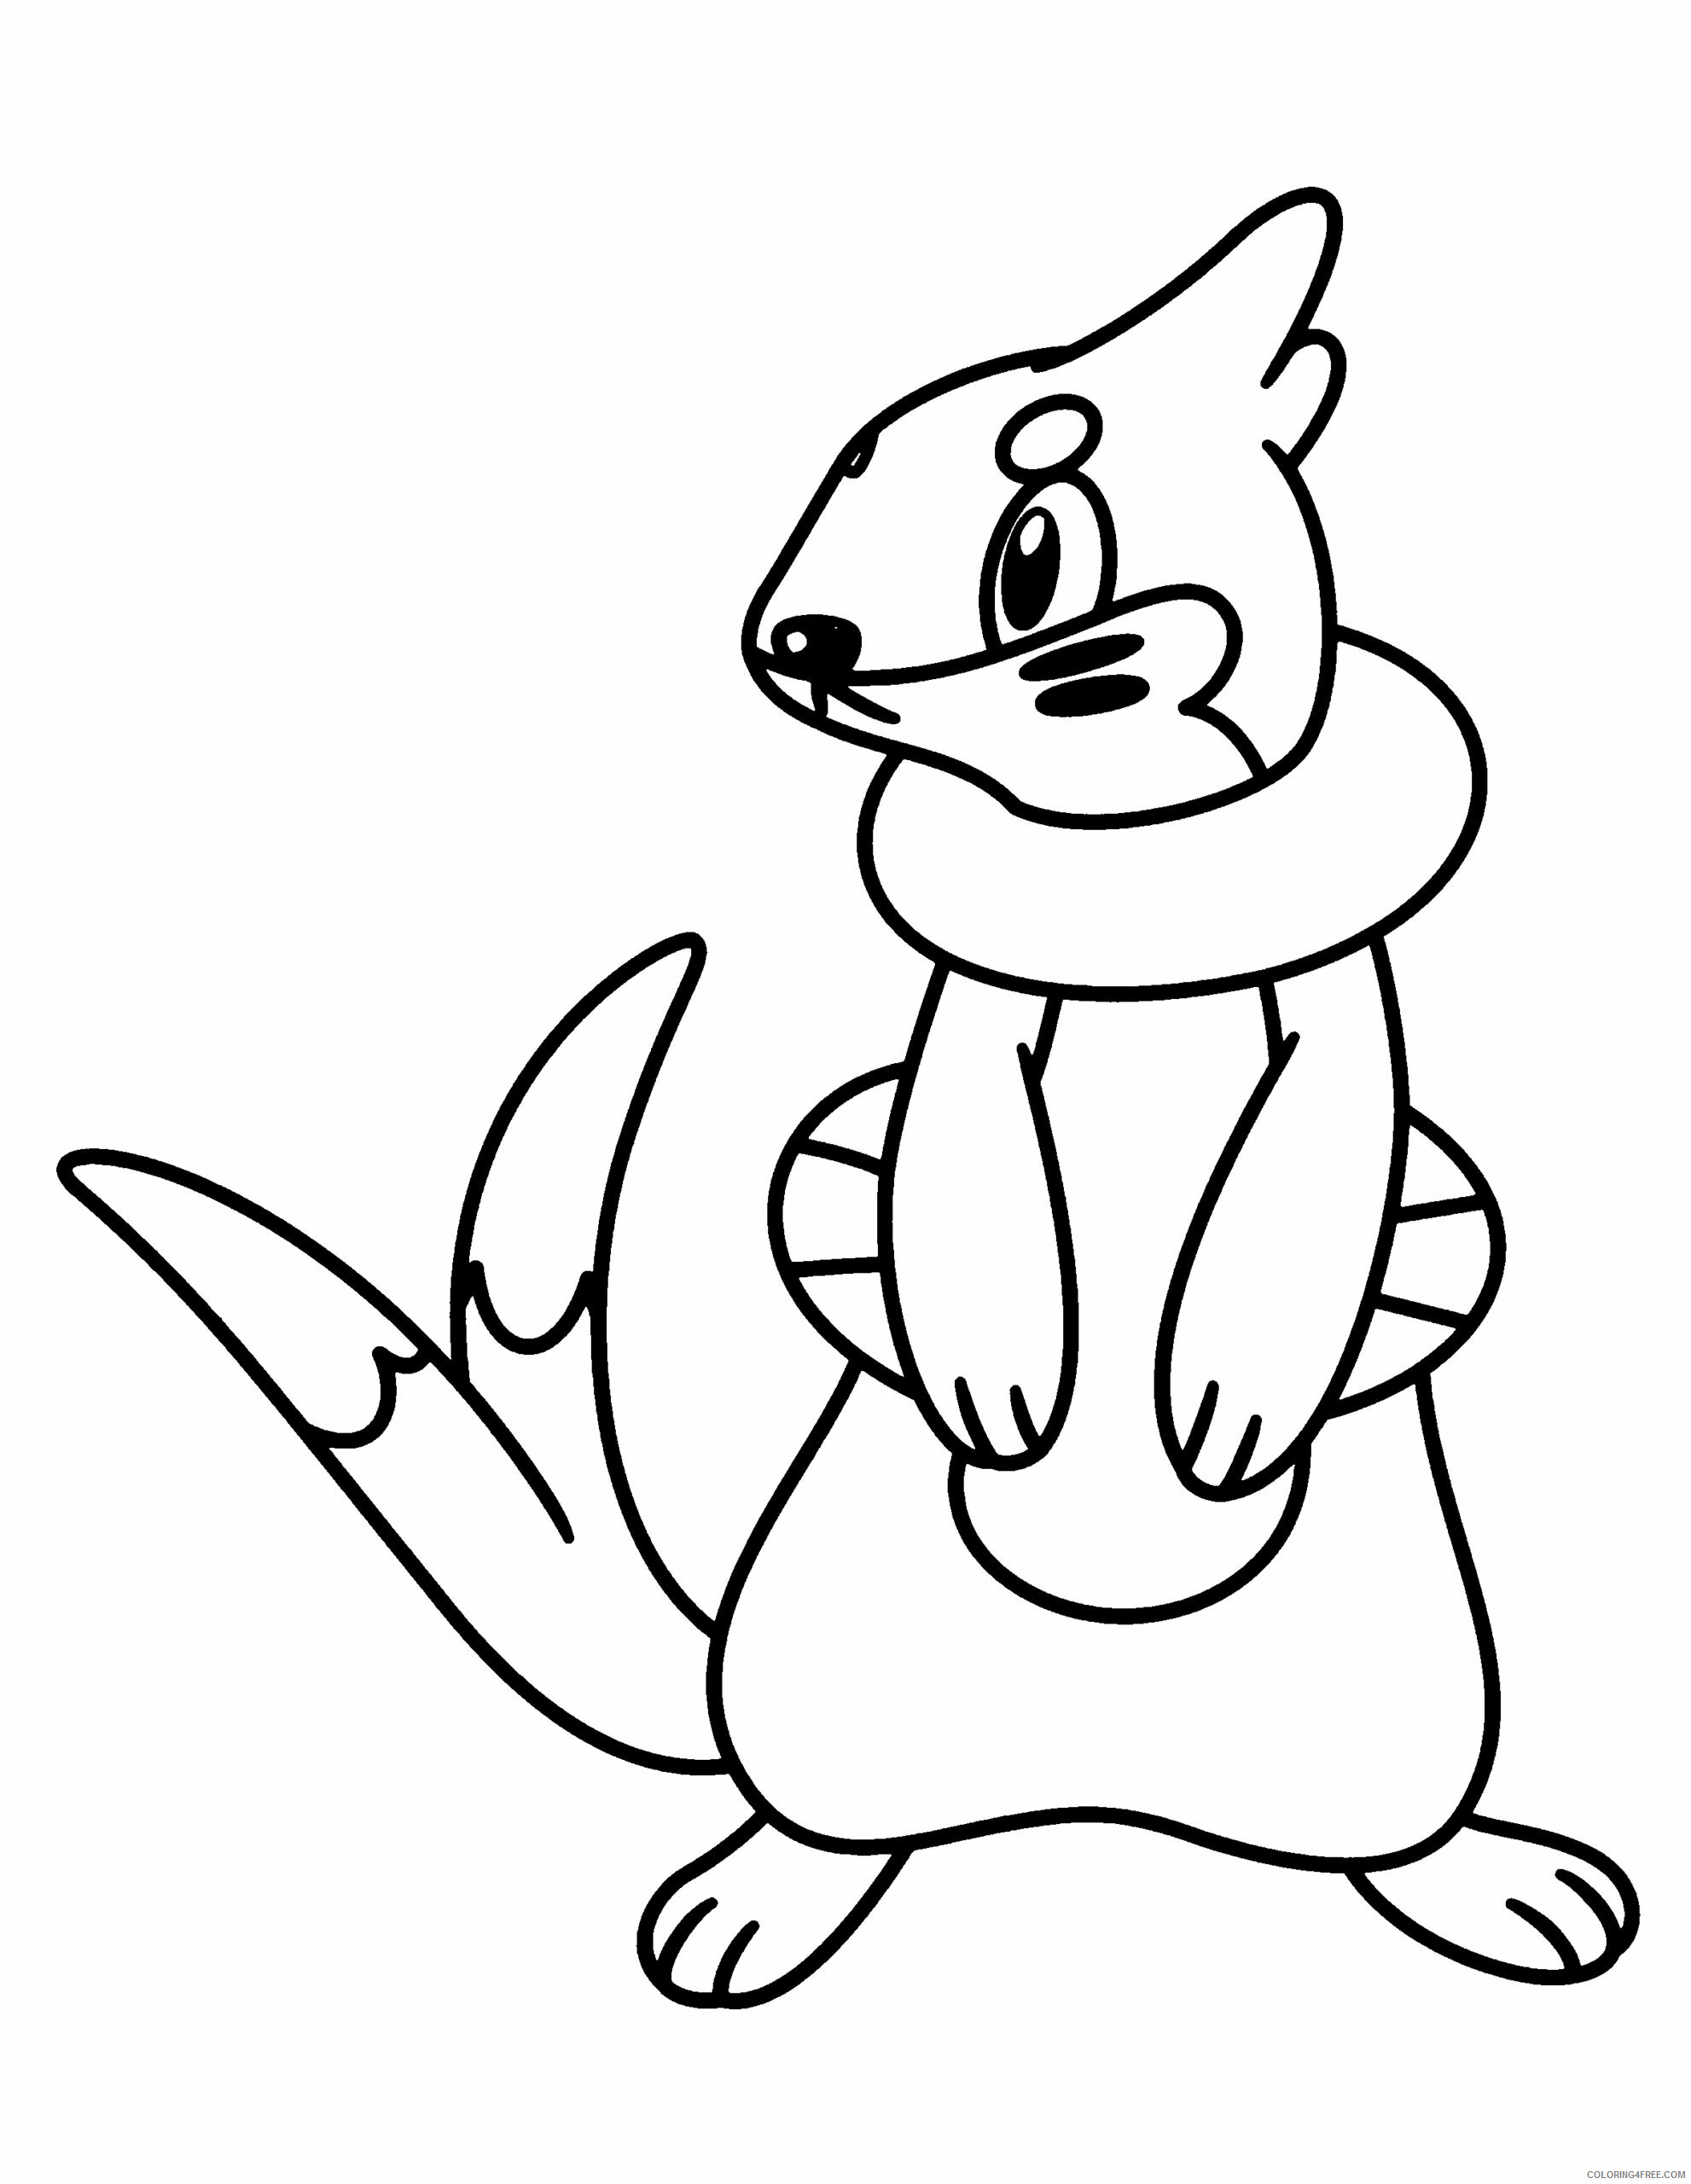 Pokemon Diamond and Pearl Coloring Pages Games Printable 2021 0897 Coloring4free